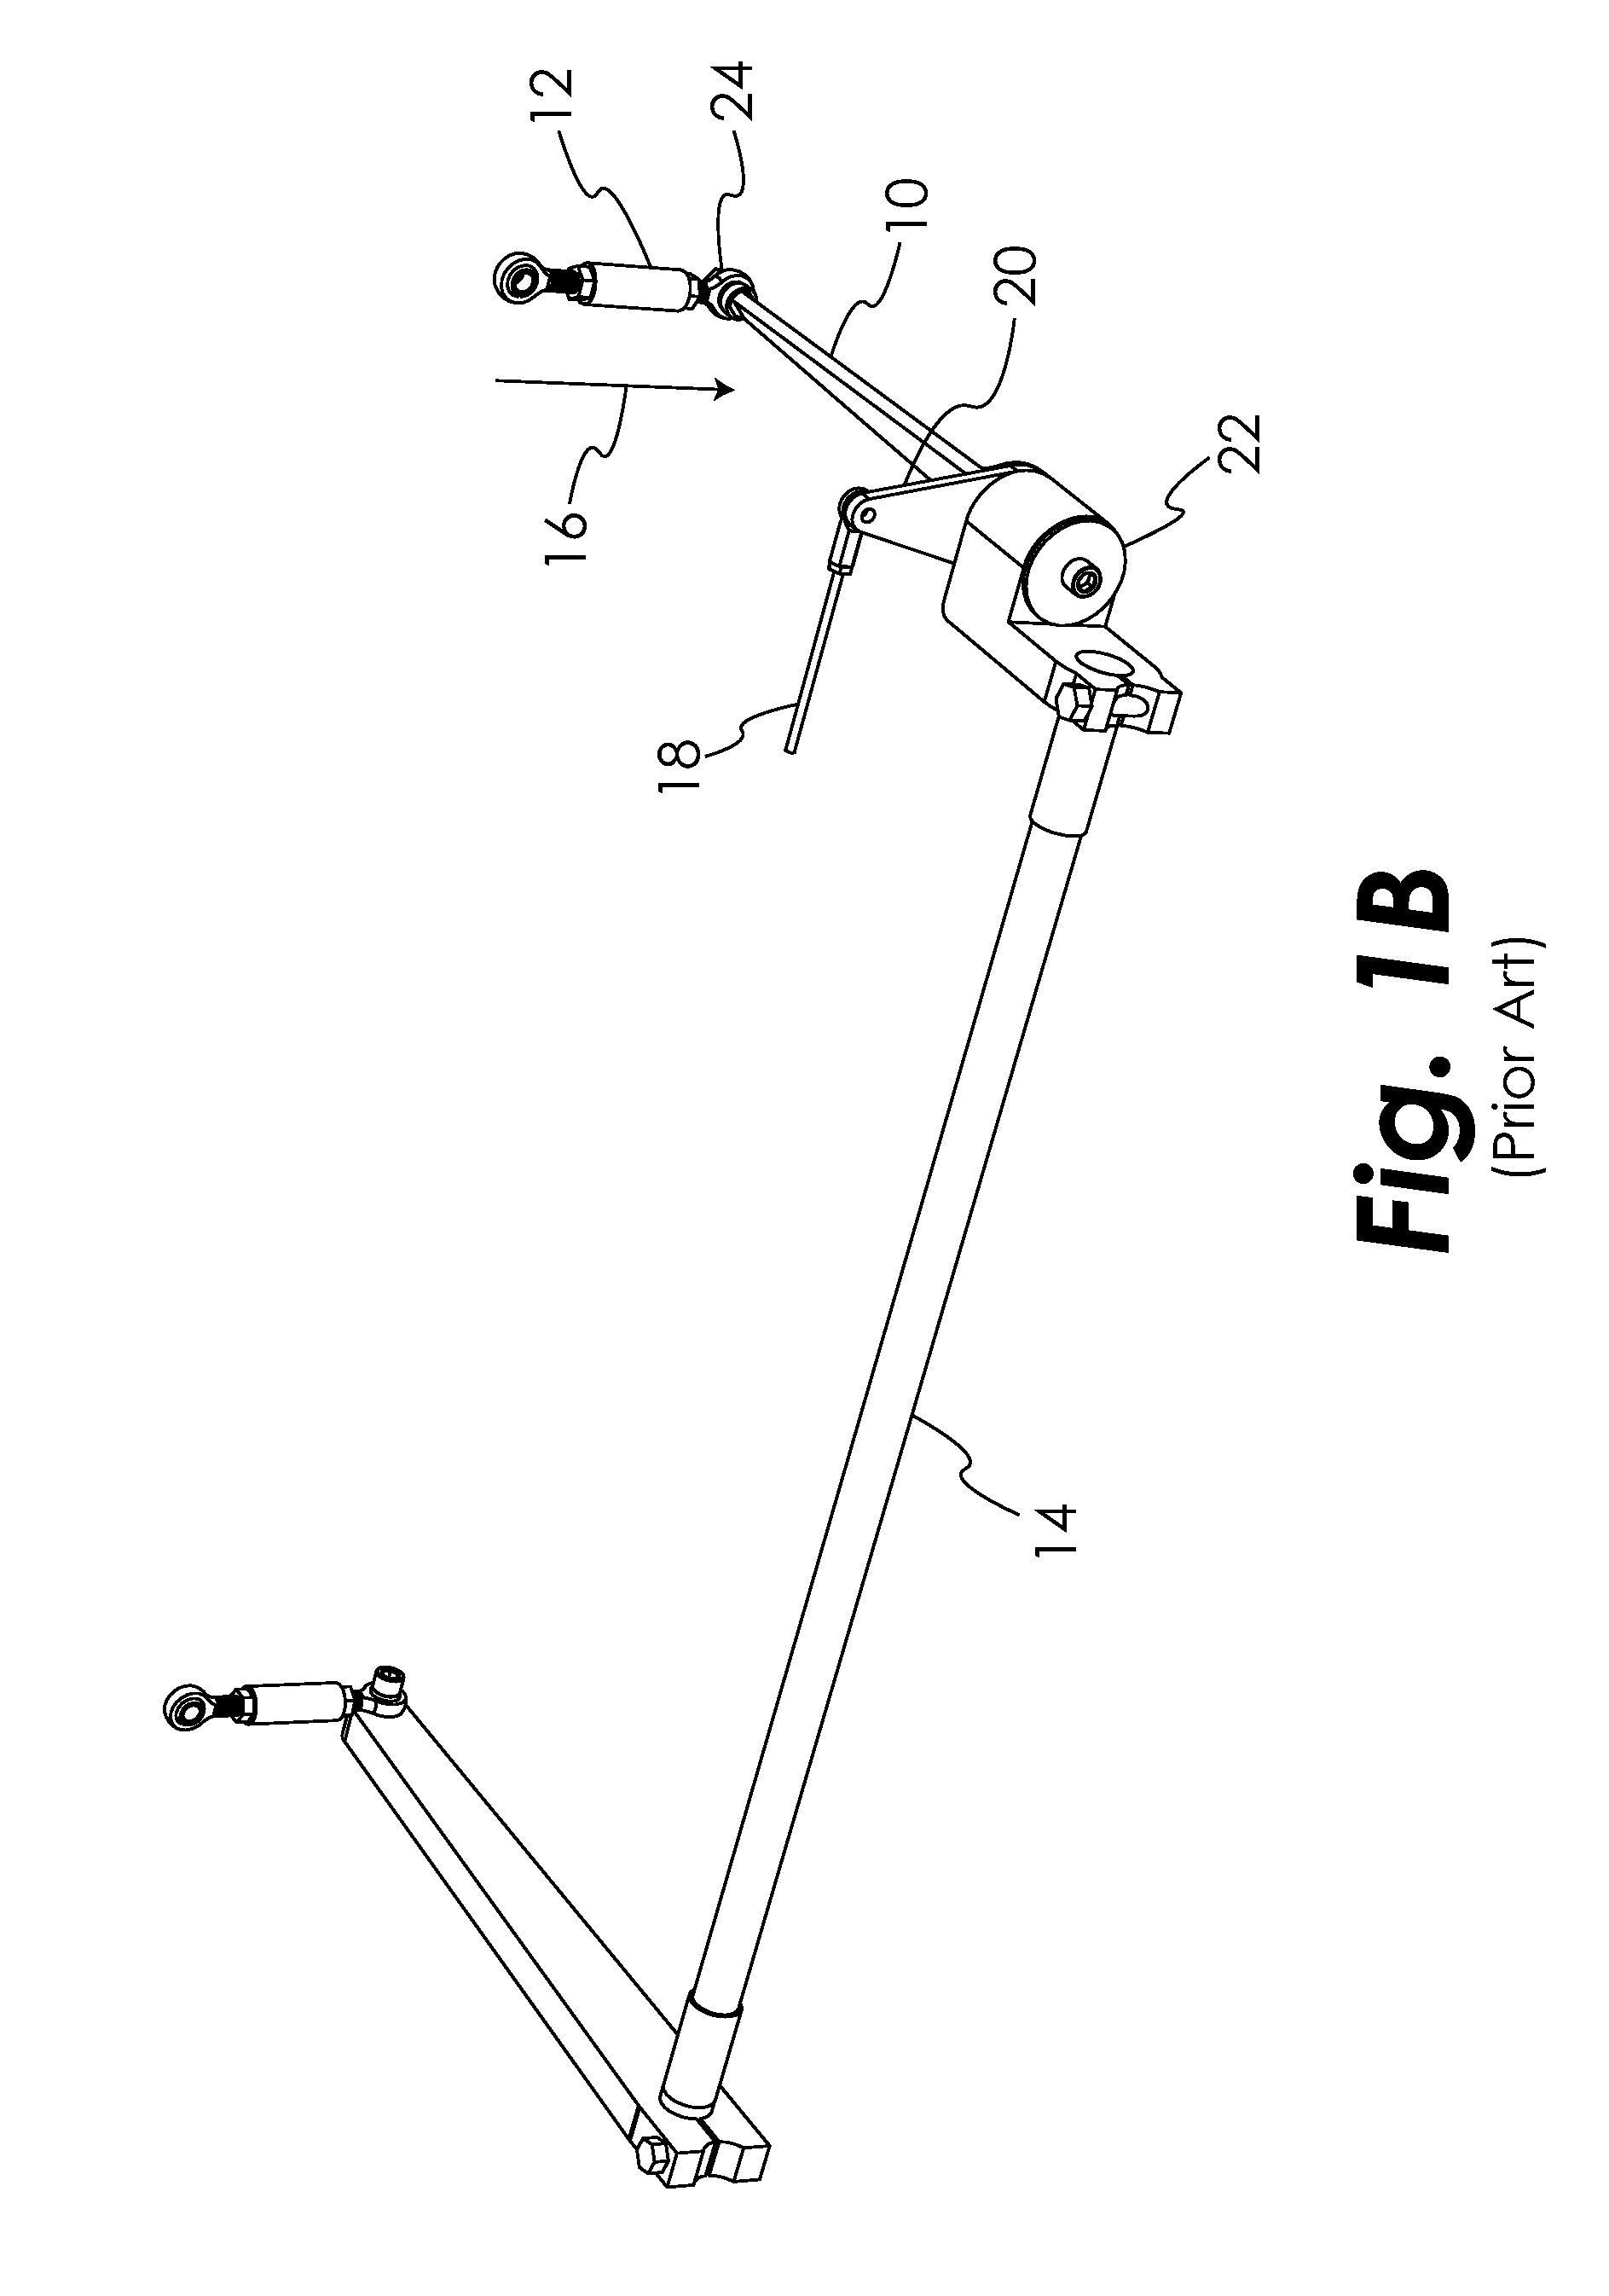 Adjustable Anti-roll bar for vehicles